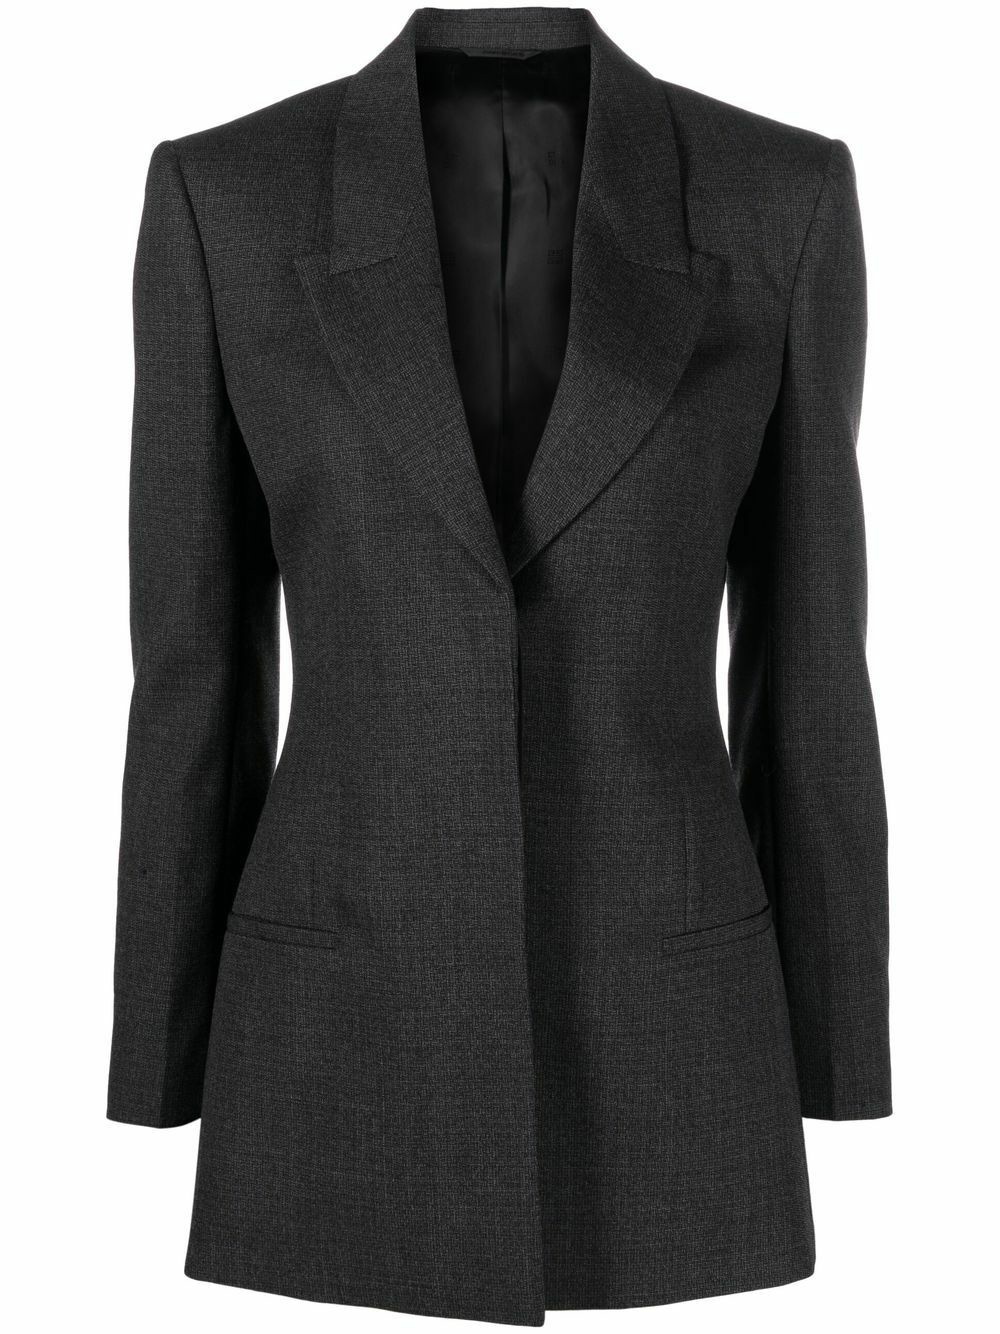 GIVENCHY - Structured Wool Jacket Givenchy